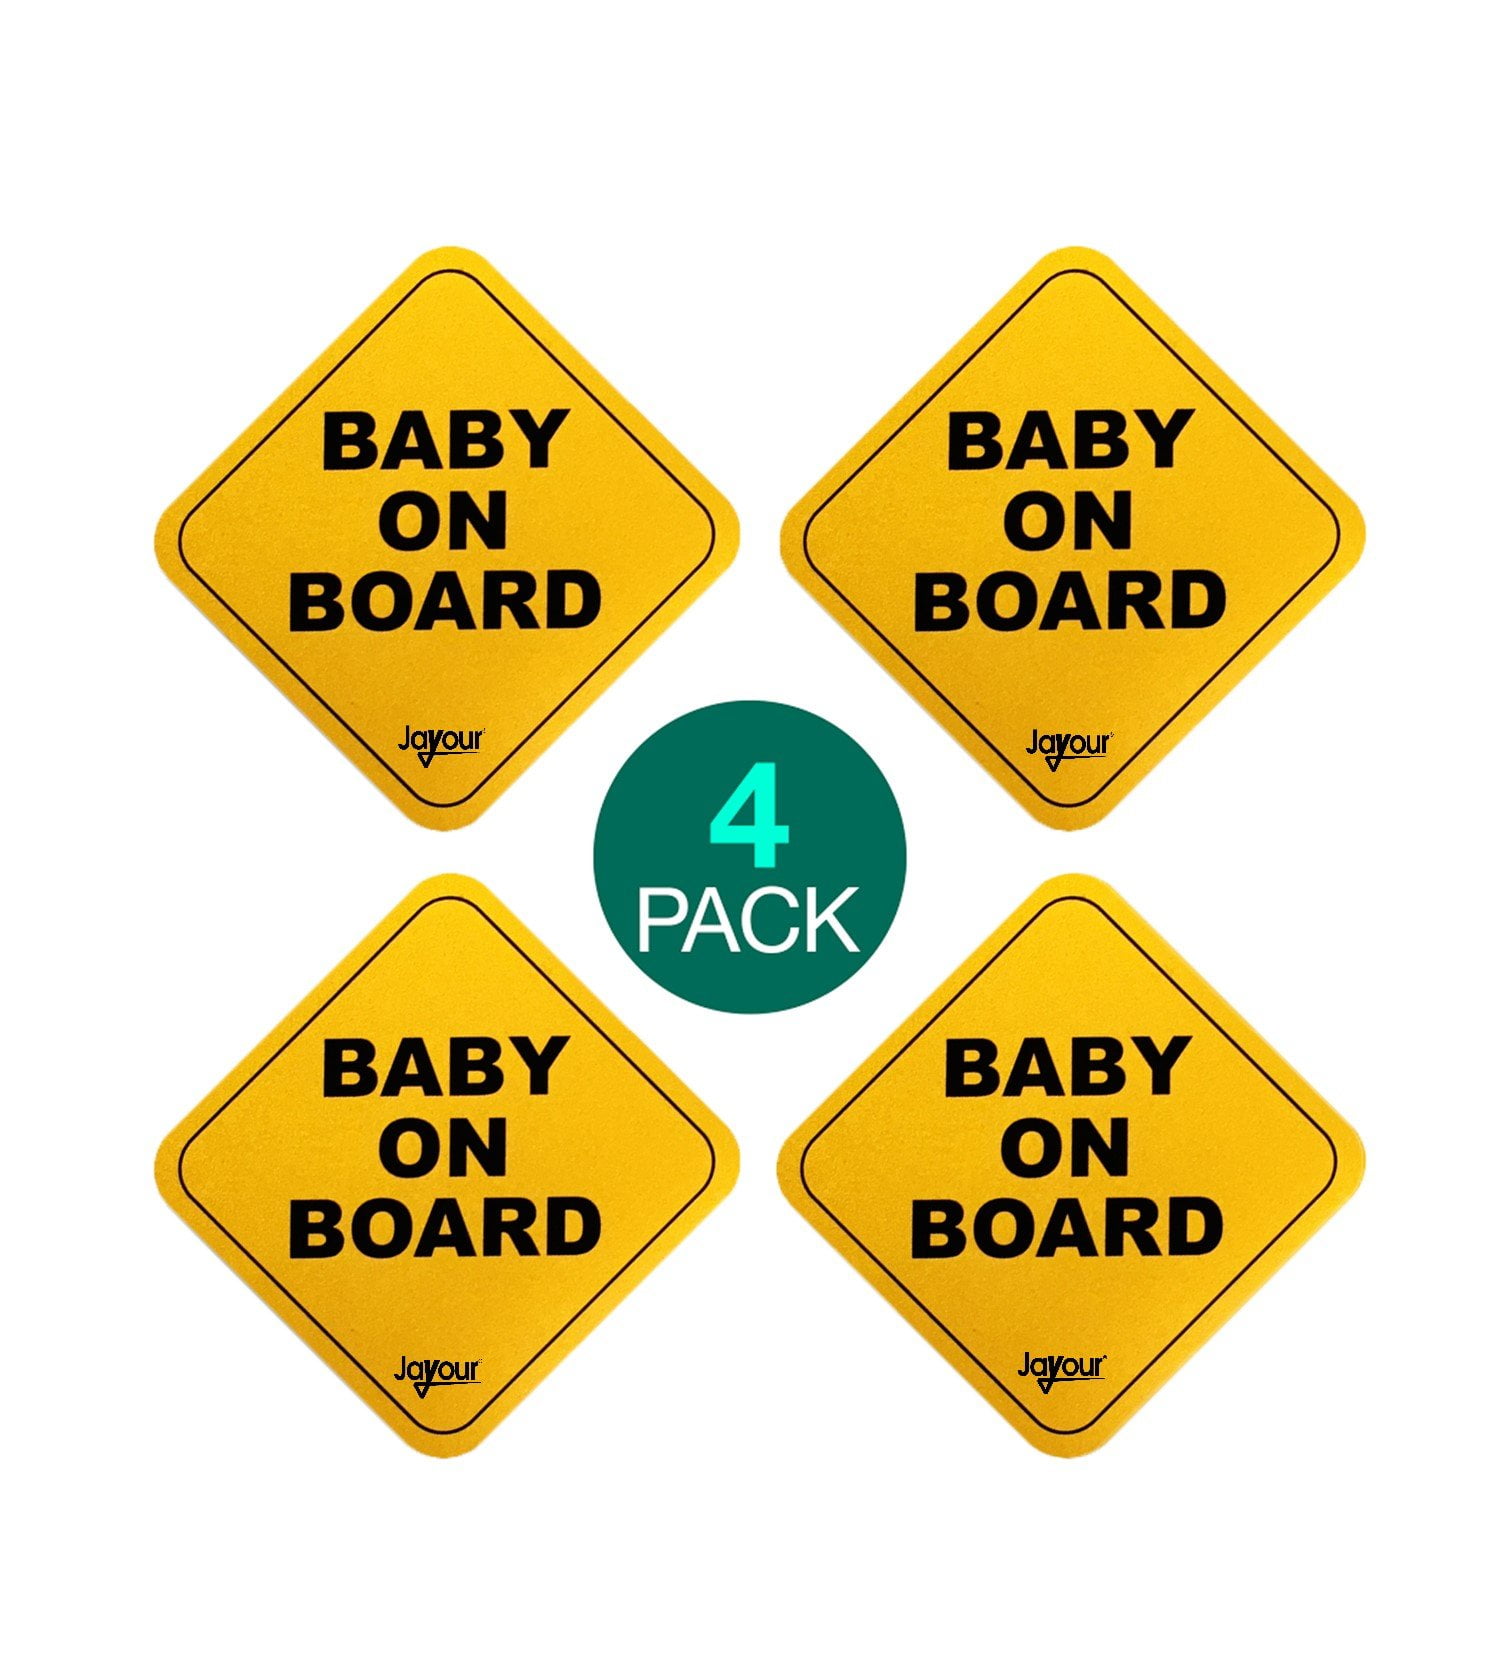 Type A 3 Pack Reflective Safety Baby On Board Large Car Magnet Signs Heavy-Duty 5x5 inch Golden Yellow Waterproof Weatherproof 